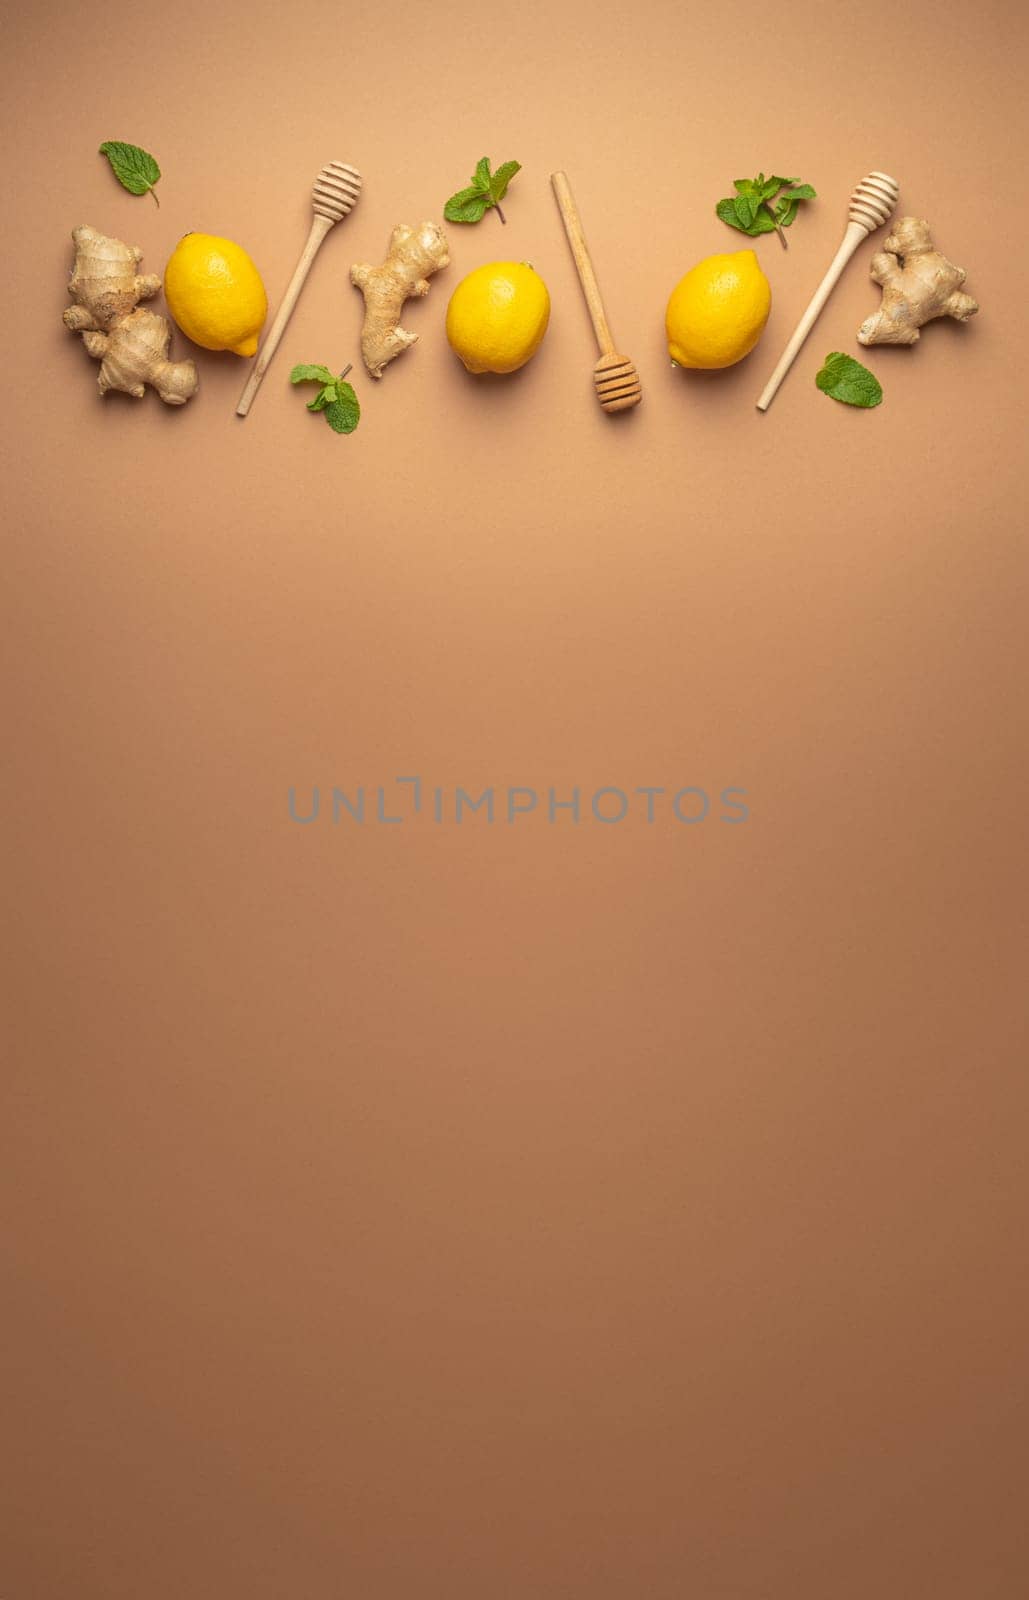 Composition with lemons, mint, ginger top view on simple beige background. Food for immunity stimulation and against seasonal flu. Healthy natural remedies to boost immune system by its_al_dente